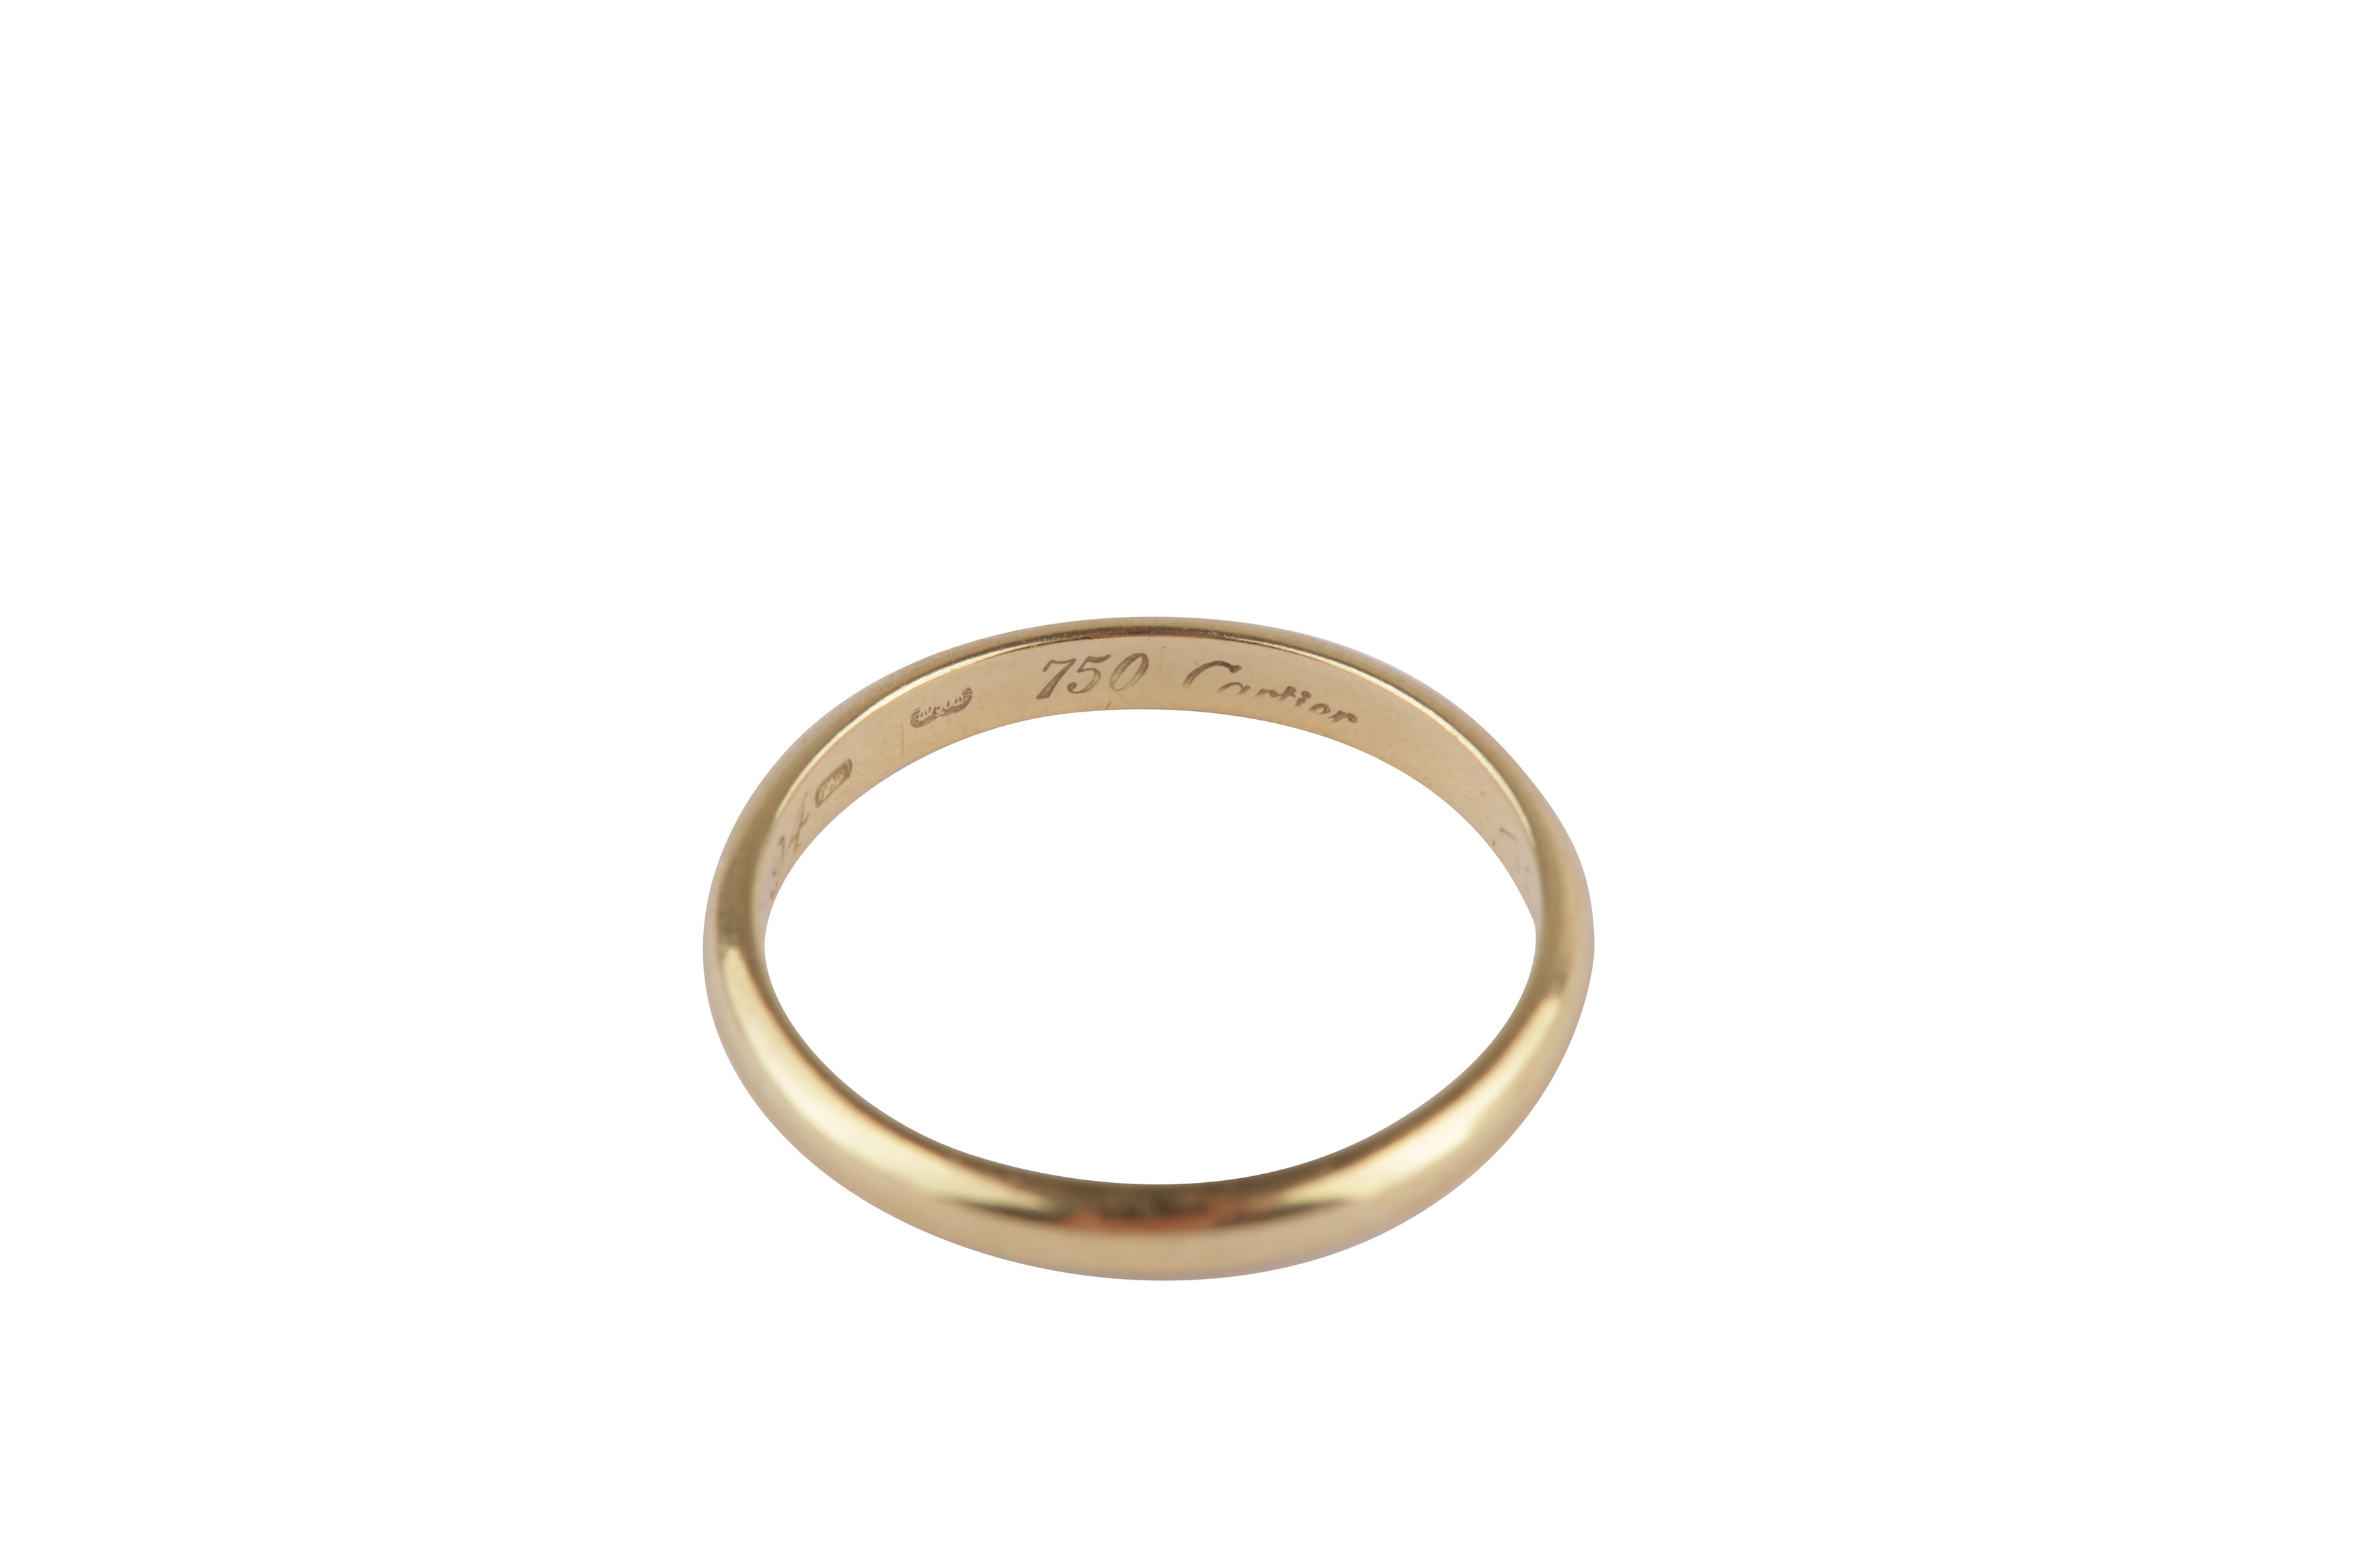 An 18 carat gold wedding band, by Cartier - Image 3 of 3